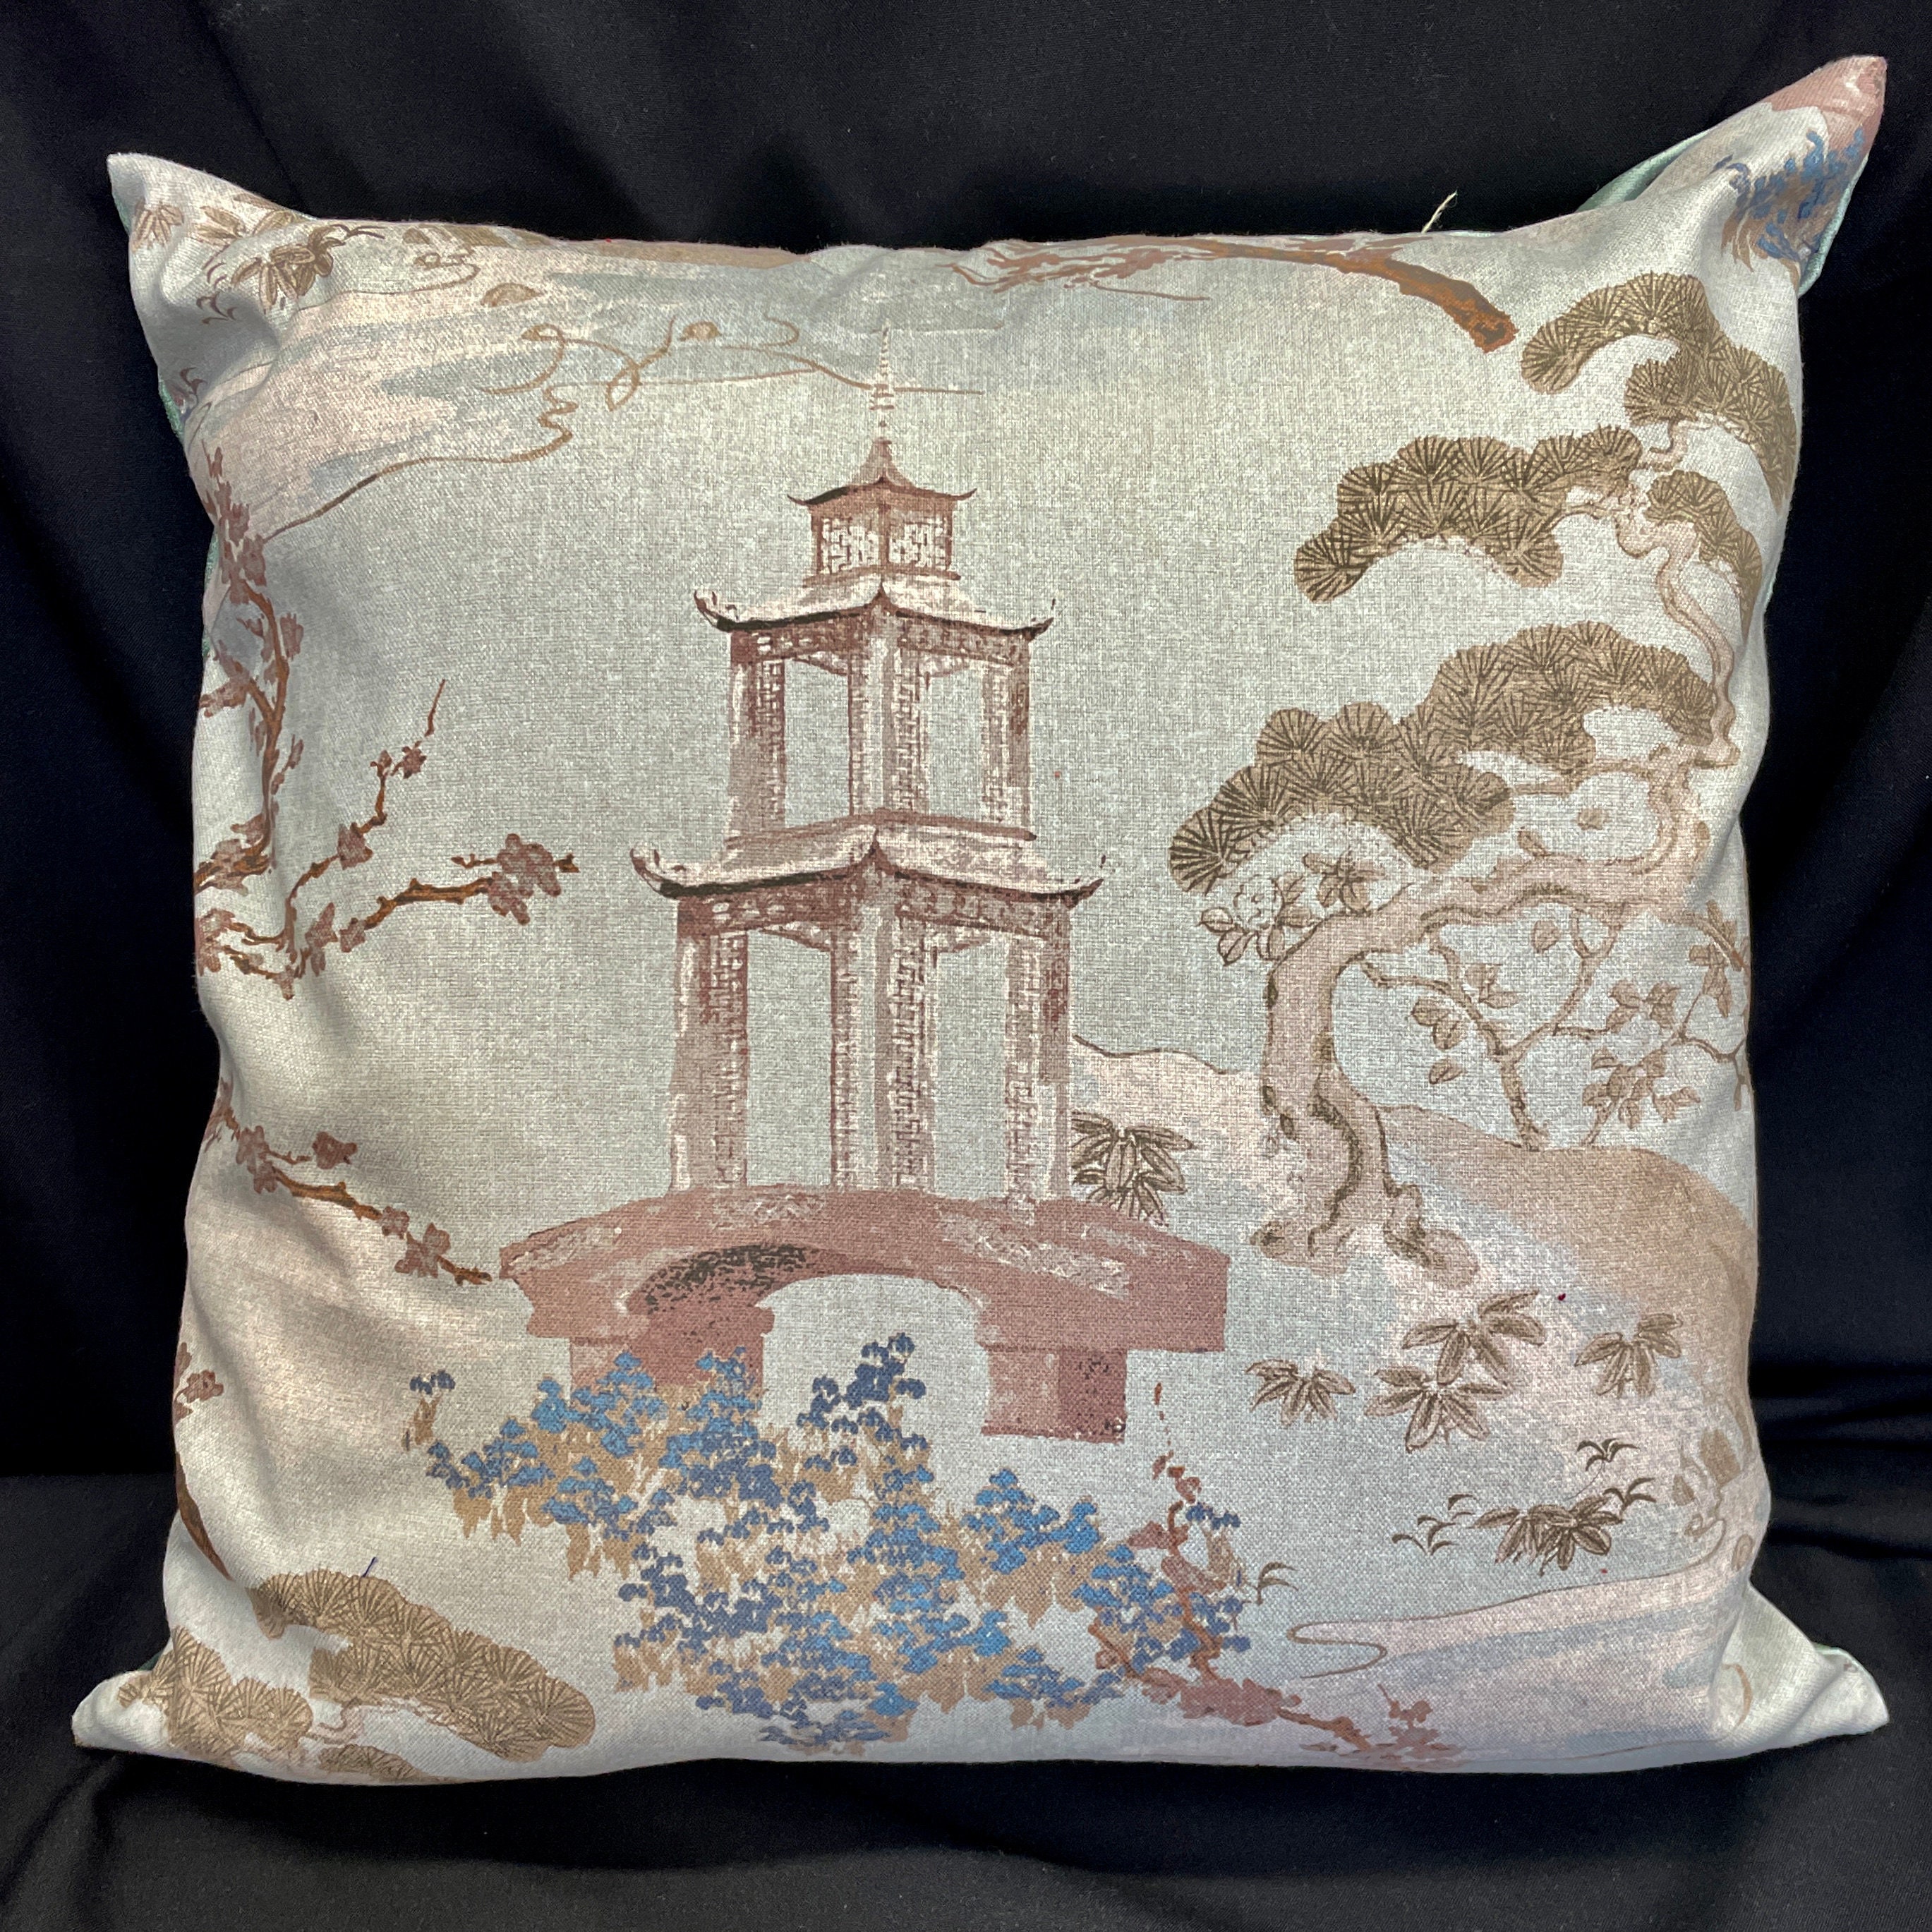  Neo Toile Pagodas in Coral Designer Lumbar Pillow Cover  Chinoiserie Pillows Asian Inspired Cushion Cover Rustic Decortaive  Pillowcase with Zipper Home decor 12x20 : Home & Kitchen